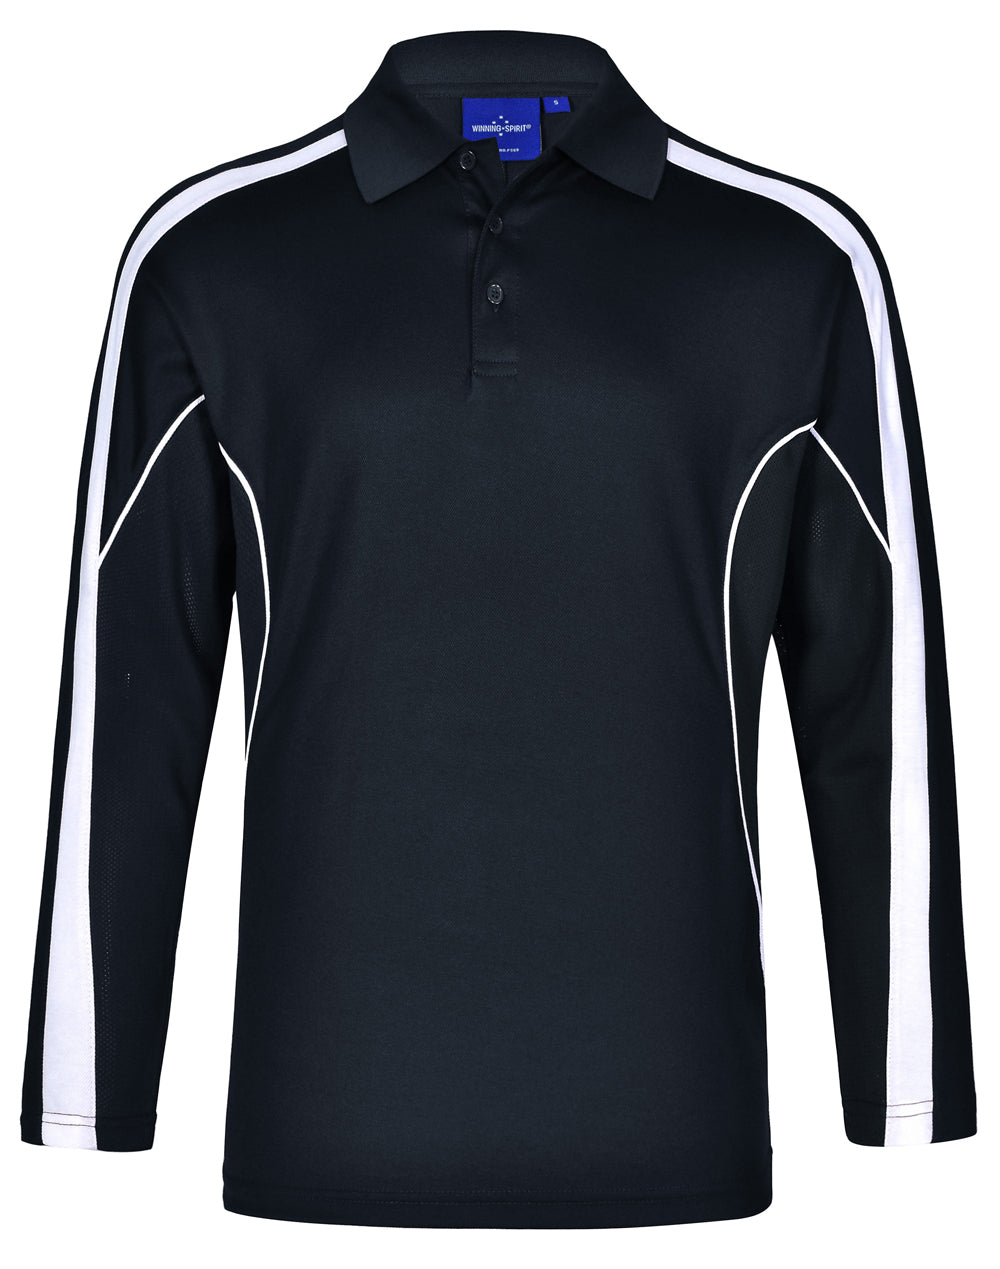 a black and white polo shirt with a white stripe